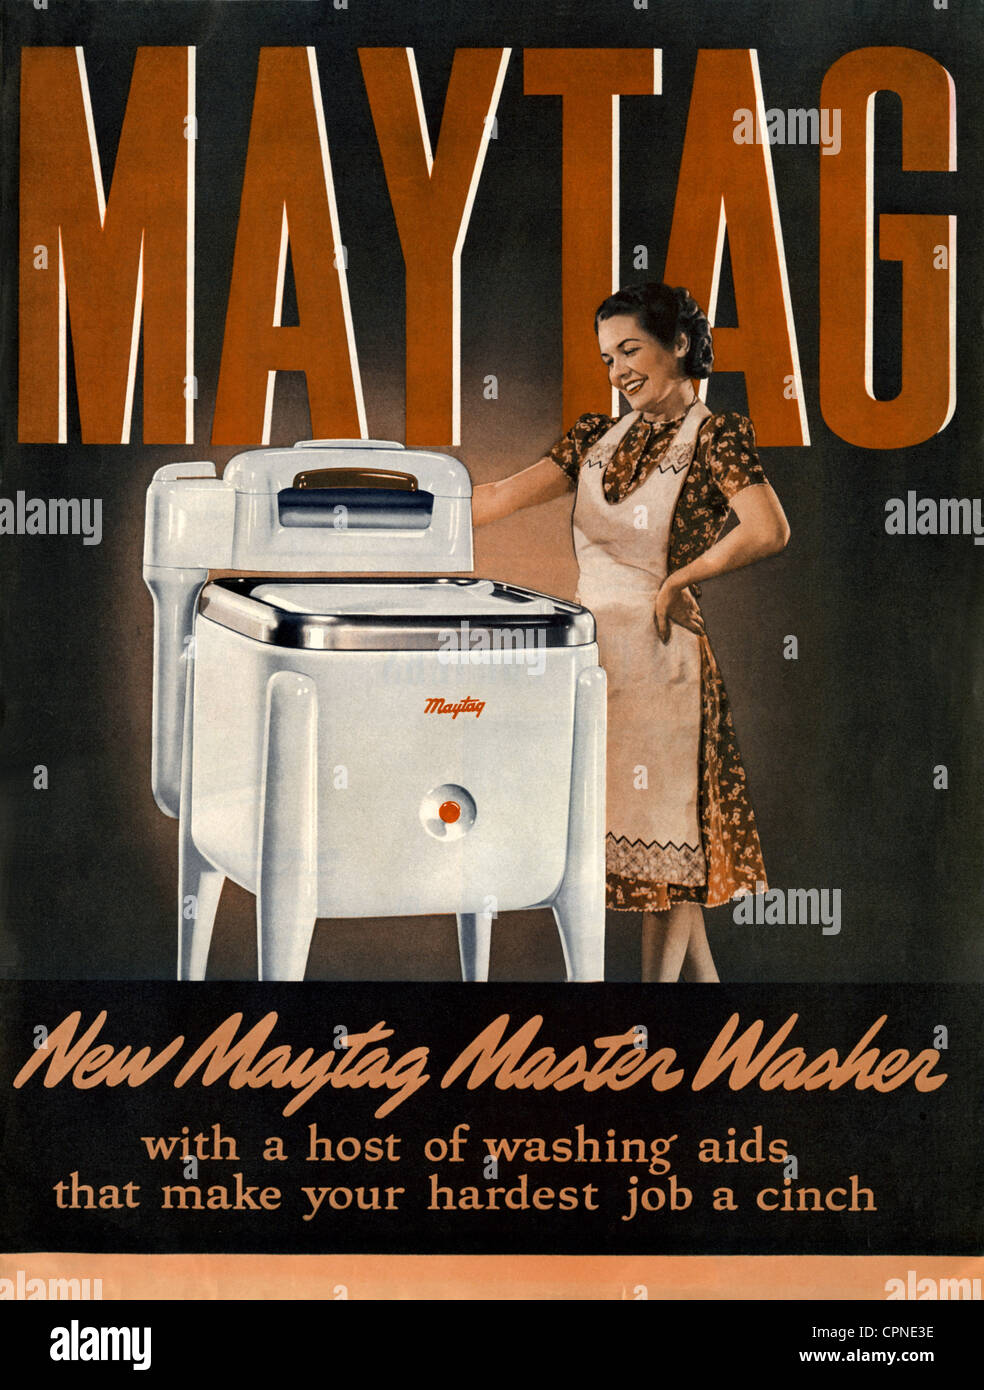 advertising, household, advertising for a new washing machine by Maytag, Master Washer, electrical washing machine with separate wringer on top, magazine advertising, USA, 1938, Additional-Rights-Clearences-Not Available Stock Photo